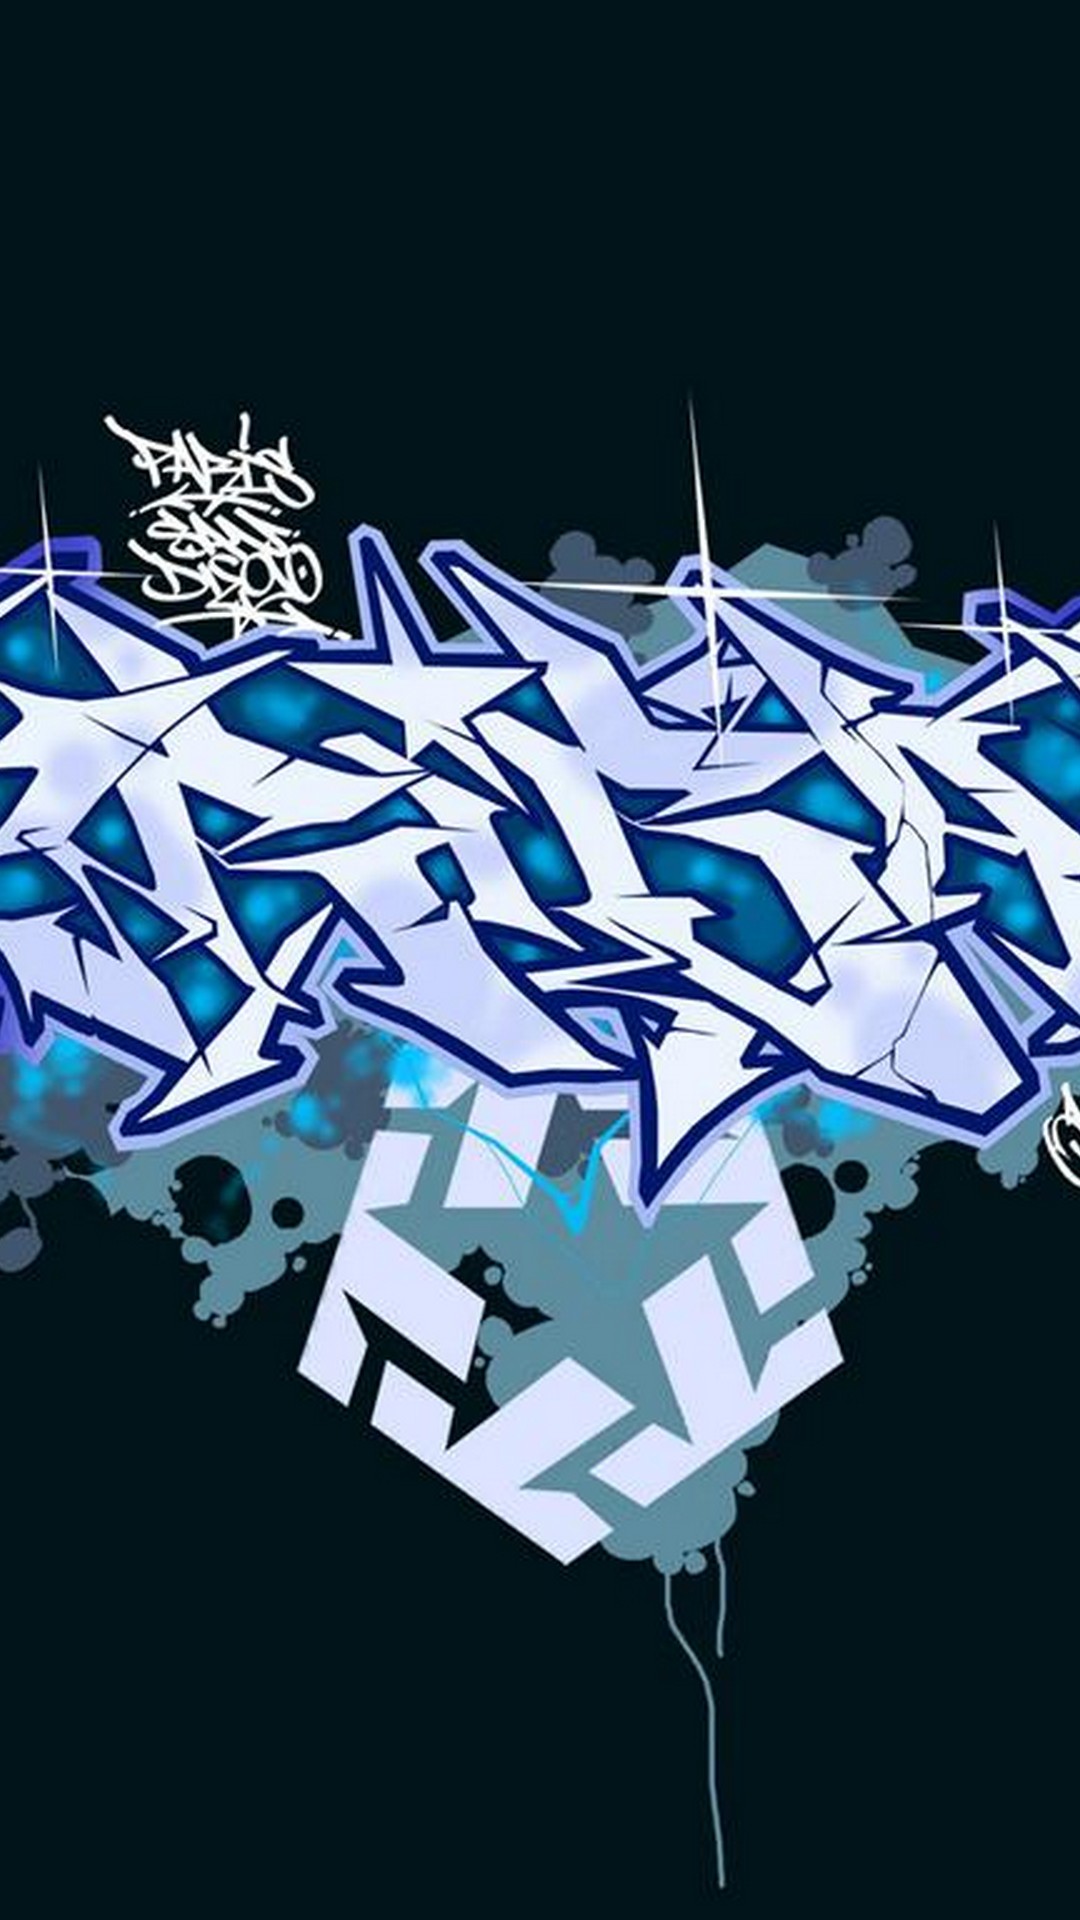 Graffiti iPhone Wallpaper HD with image resolution 1080x1920 pixel. You can make this wallpaper for your Desktop Computer Backgrounds, Mac Wallpapers, Android Lock screen or iPhone Screensavers